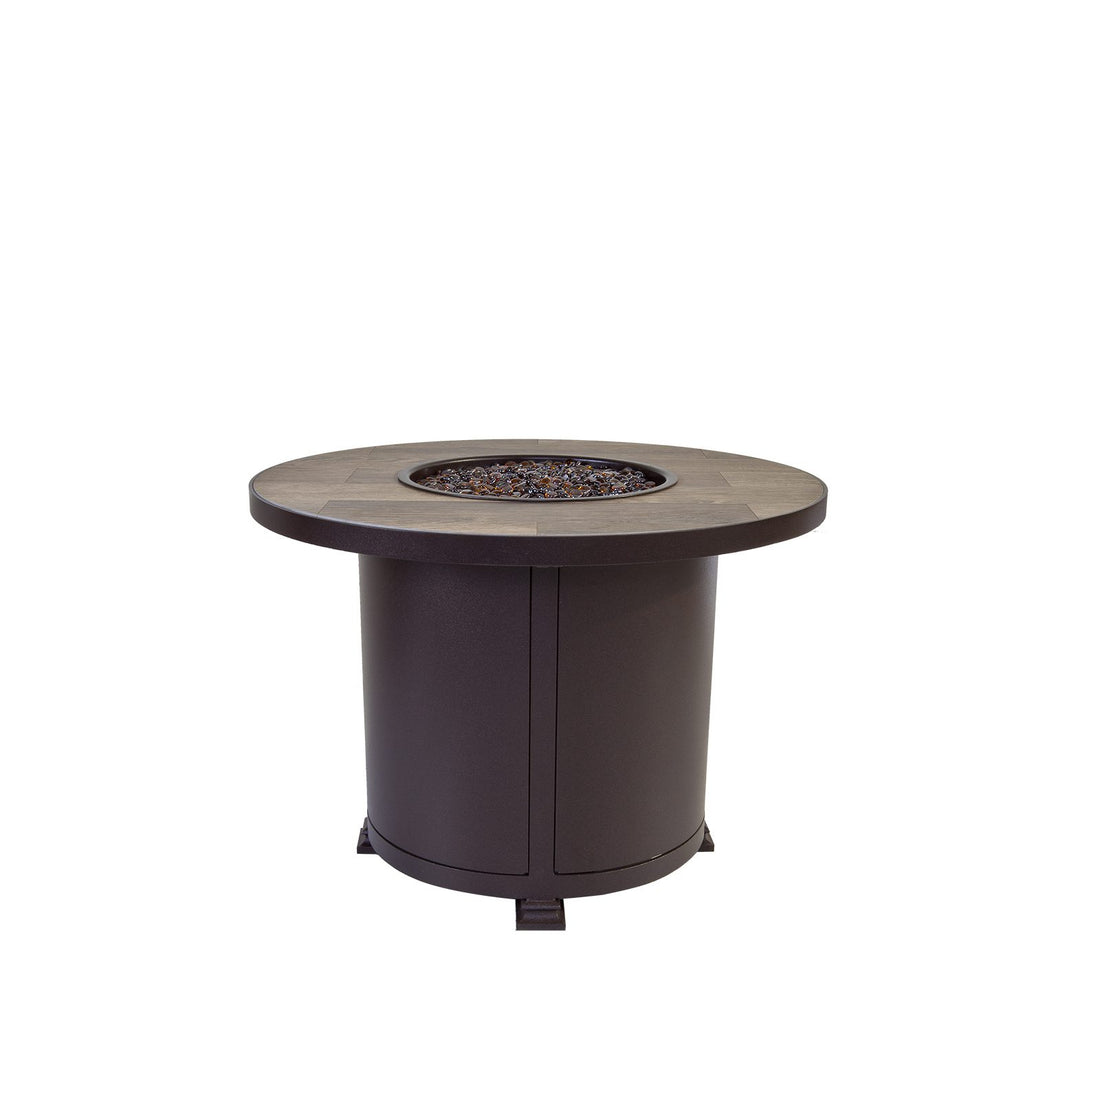 Santorini Round Chat Height Fire Pit